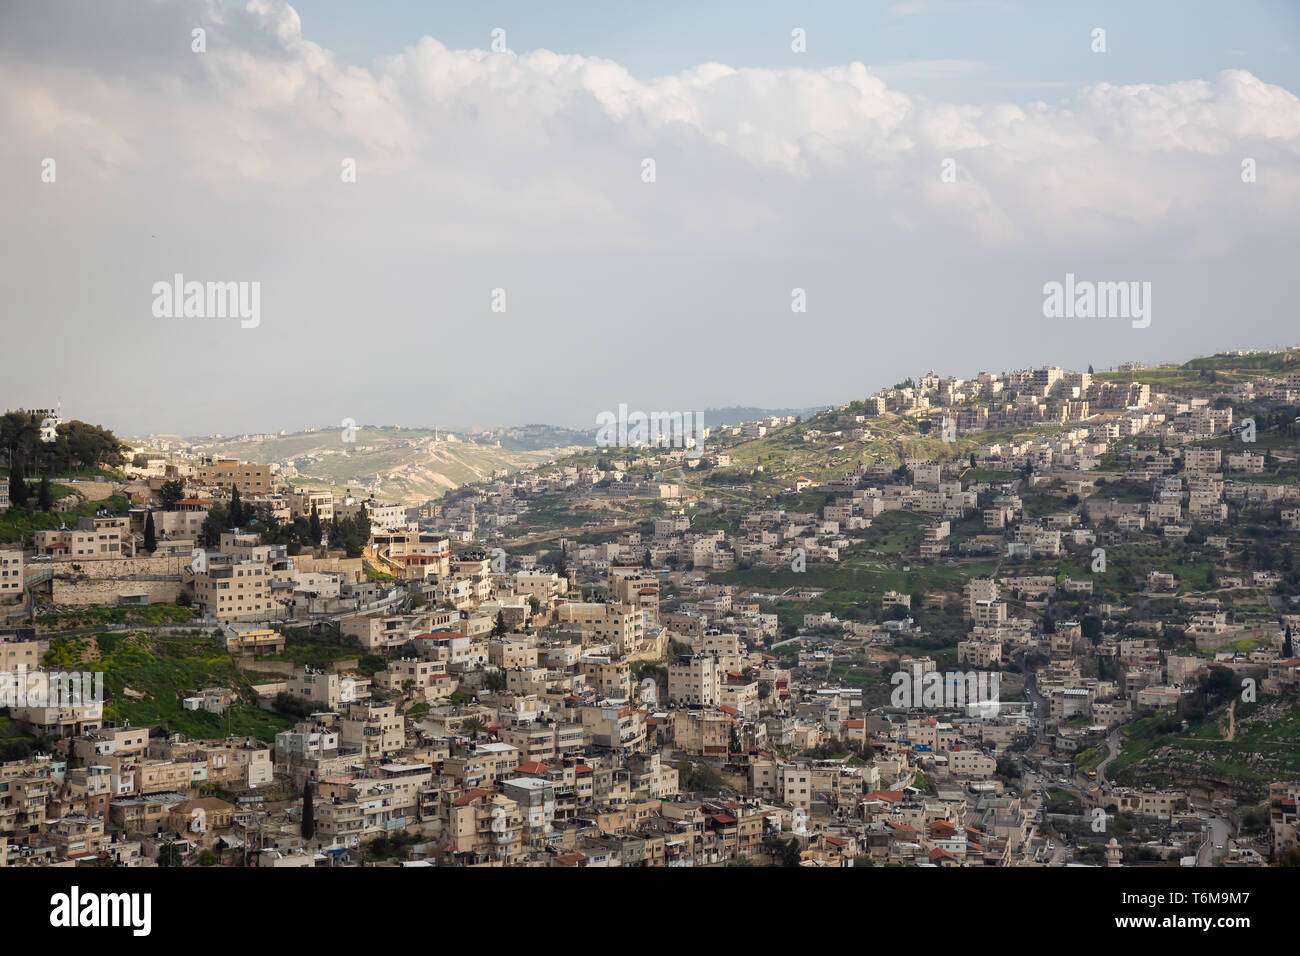 Aerial cityscape view of Jabal Batin alHawa residential neighborhood during a cloudy day. Taken in Jerusalem, Israel. Stock Photo